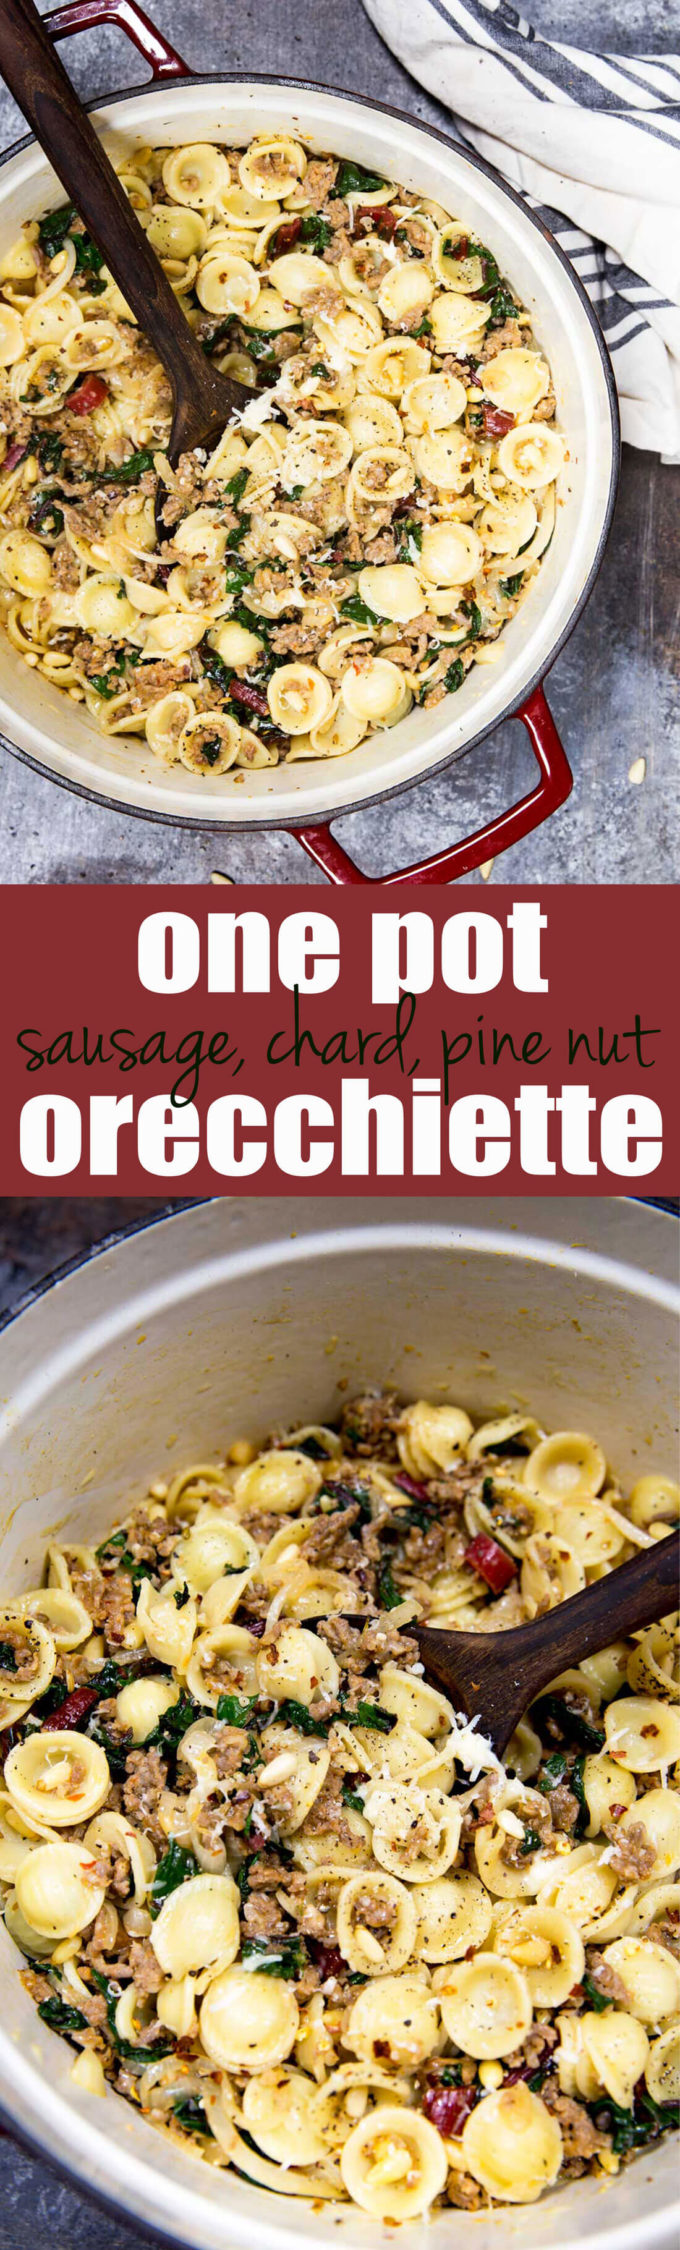 One pan sausage, chard, and pine nut orrecchiette